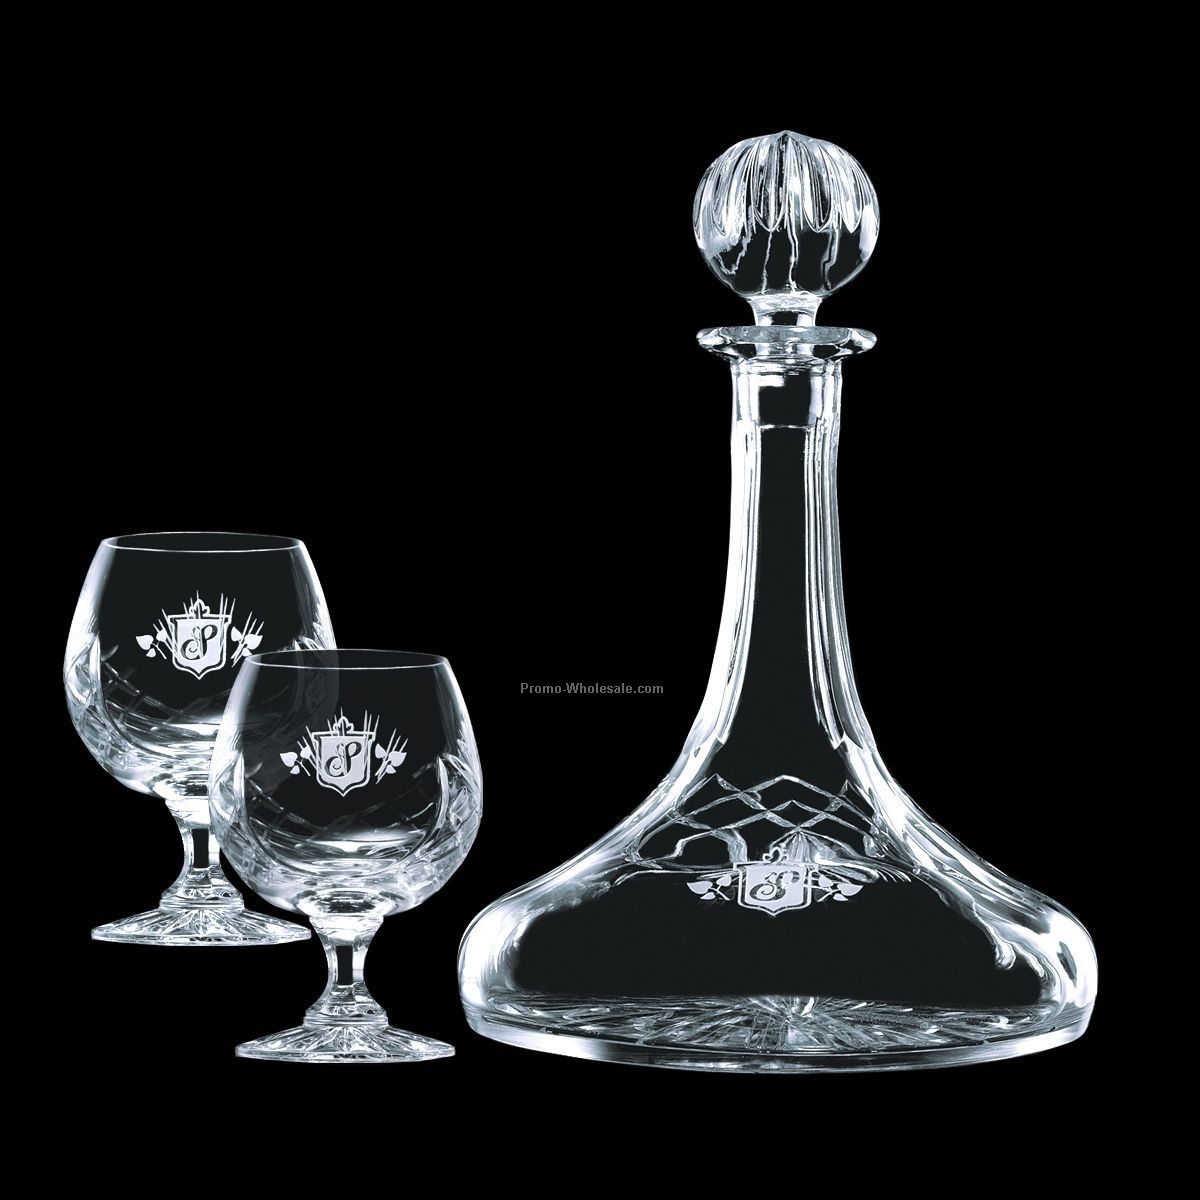 Chesswood Crystal Decanter & 2 Wine Glasses